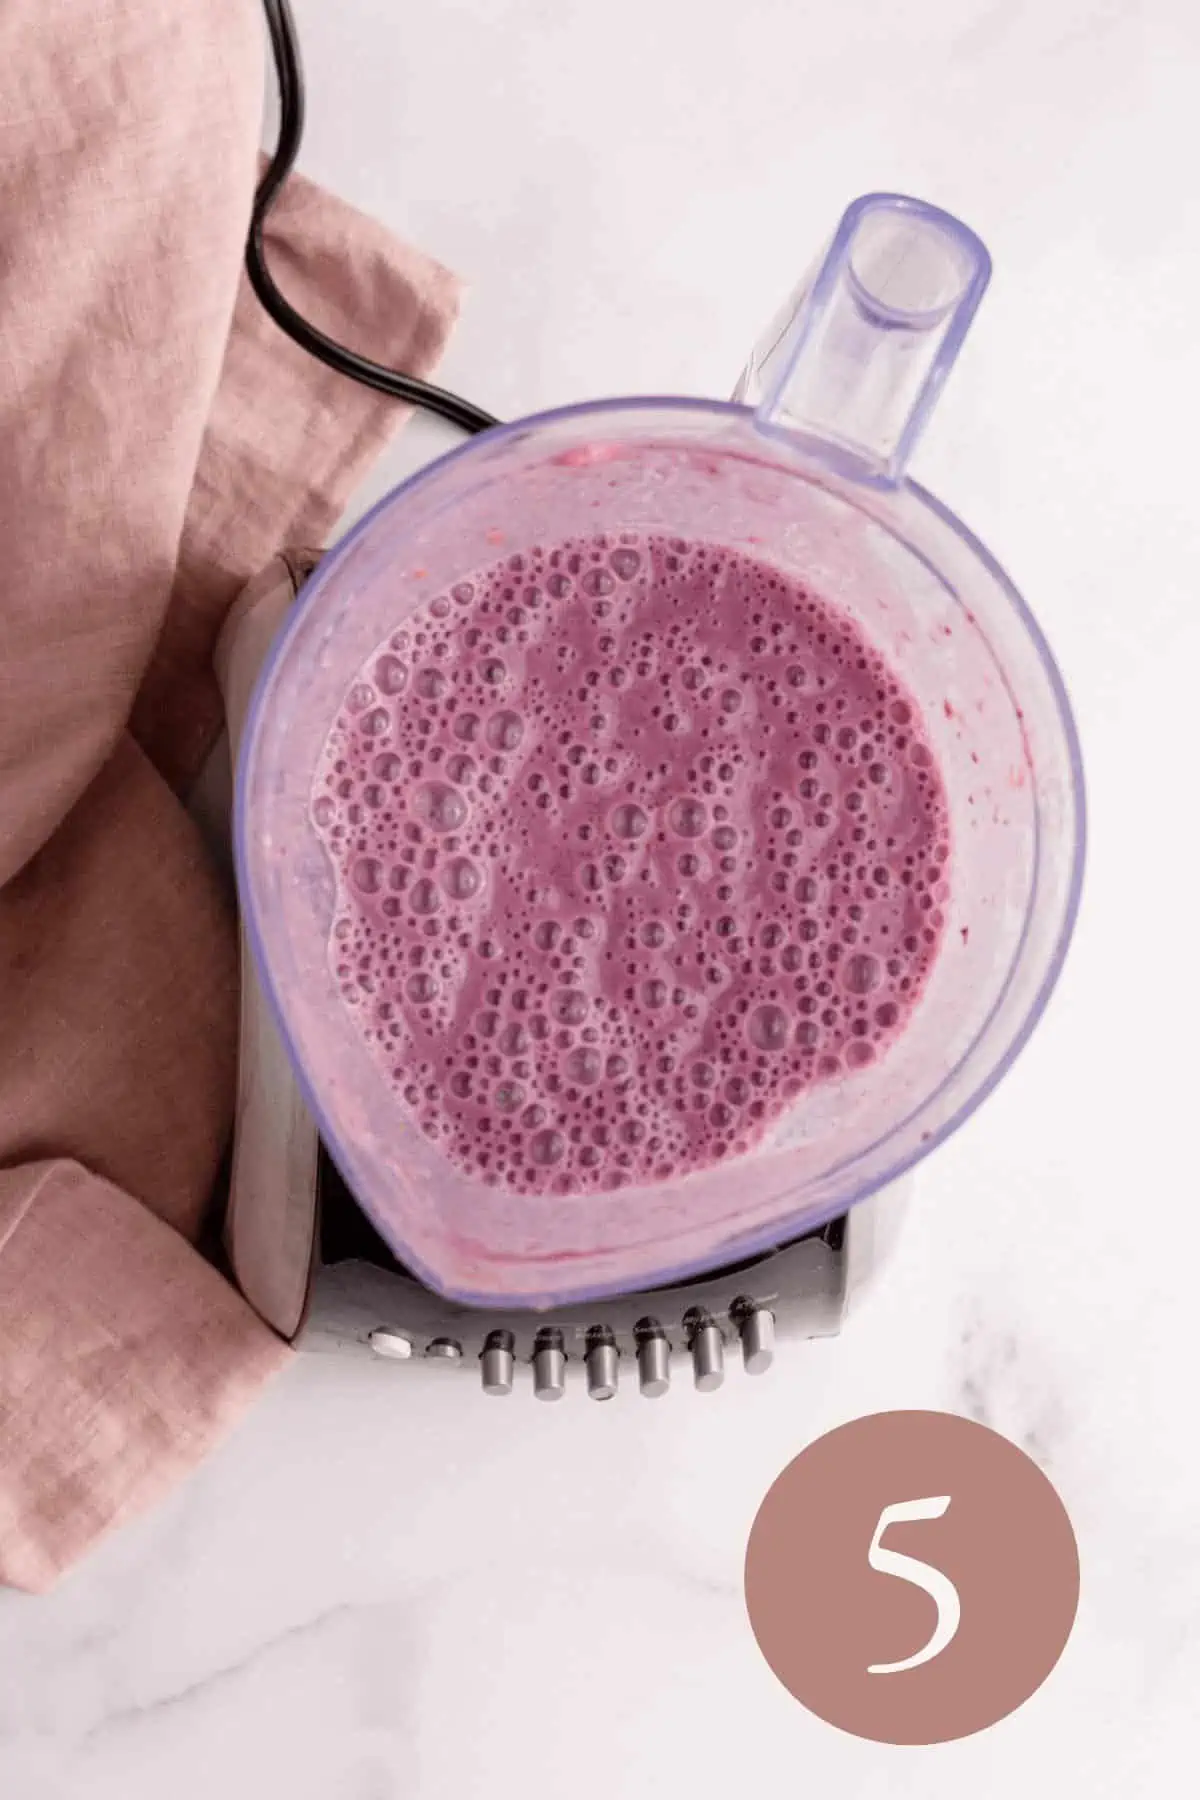 Overhead image of blackberry strawberry banana smoothie blended before topping with fruit